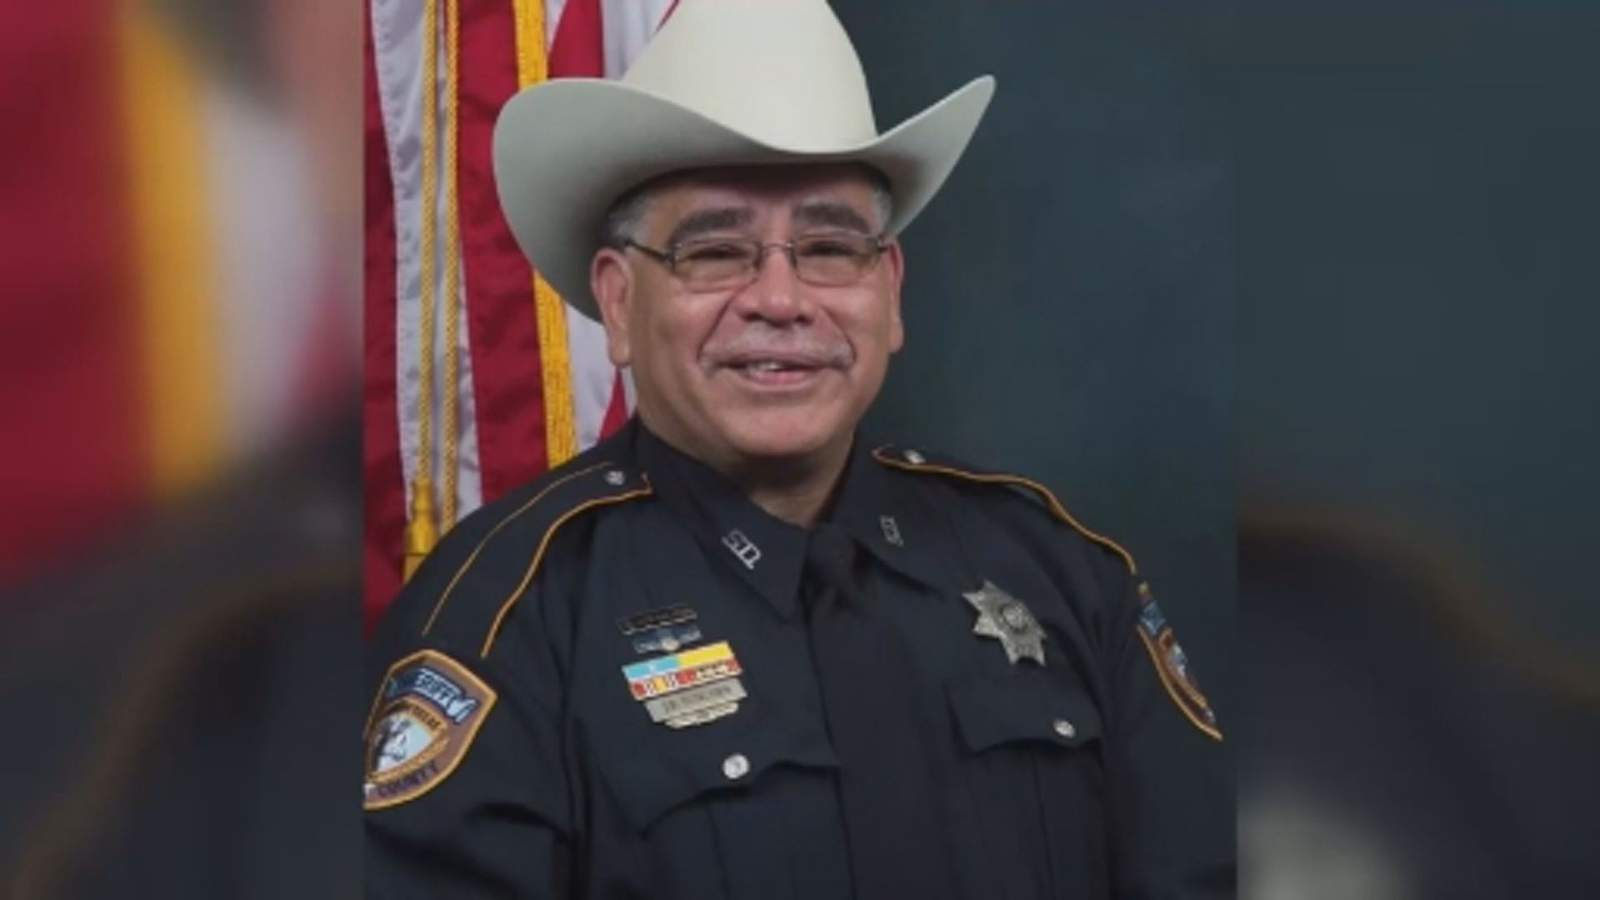 Third Harris County deputy dies of COVID-19, officials say